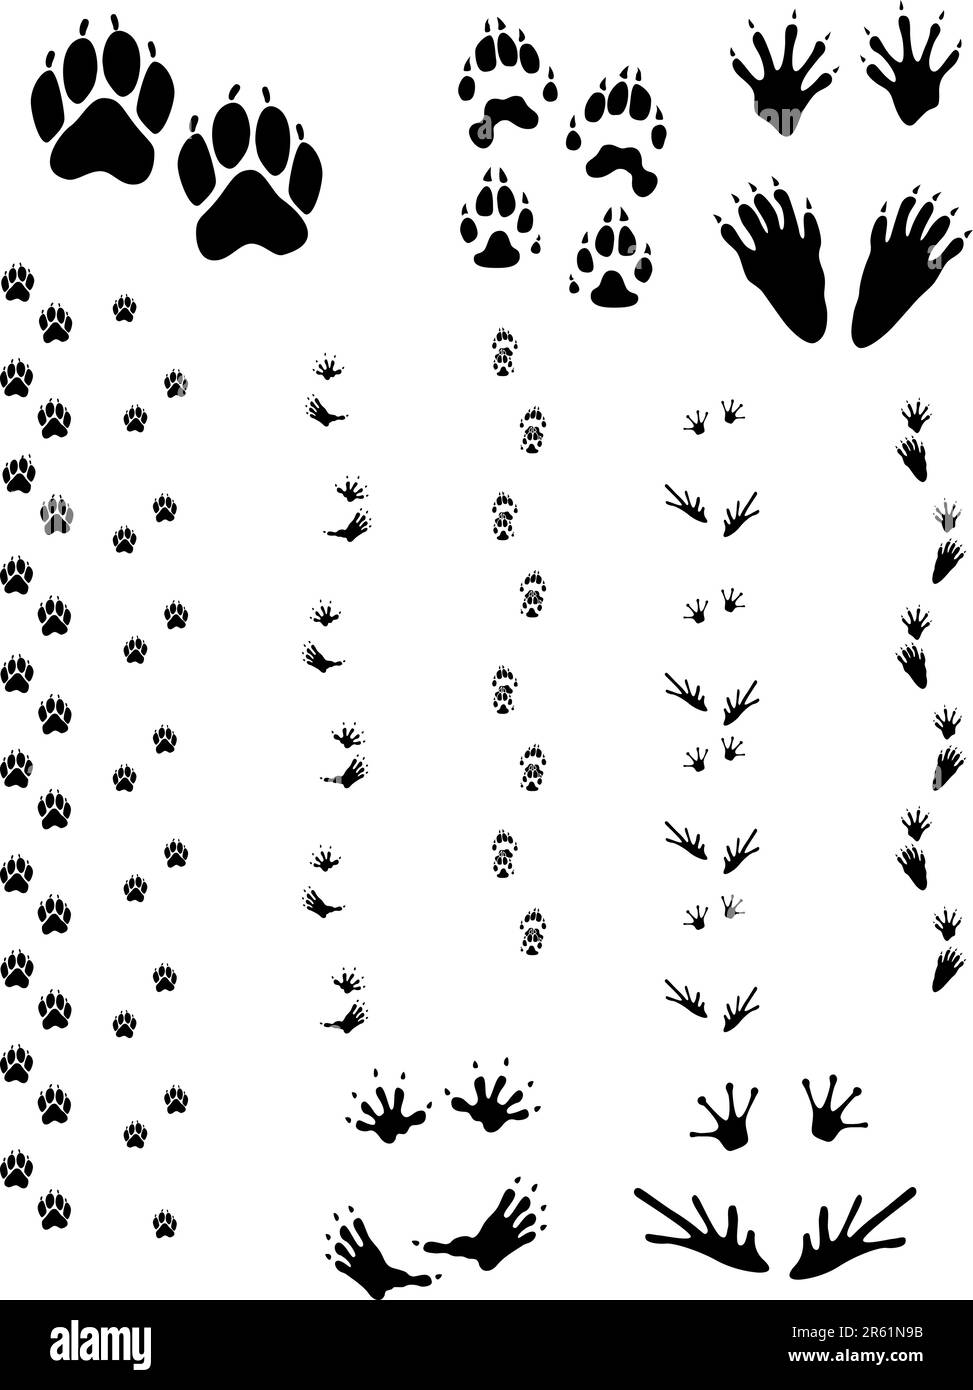 Paw prints and tracks of five different animals. Top Row Left to right: Dog, Wolverine, Raccoon. Bottom Row: Opossum, Frog.    Vectors are all clea... Stock Vector